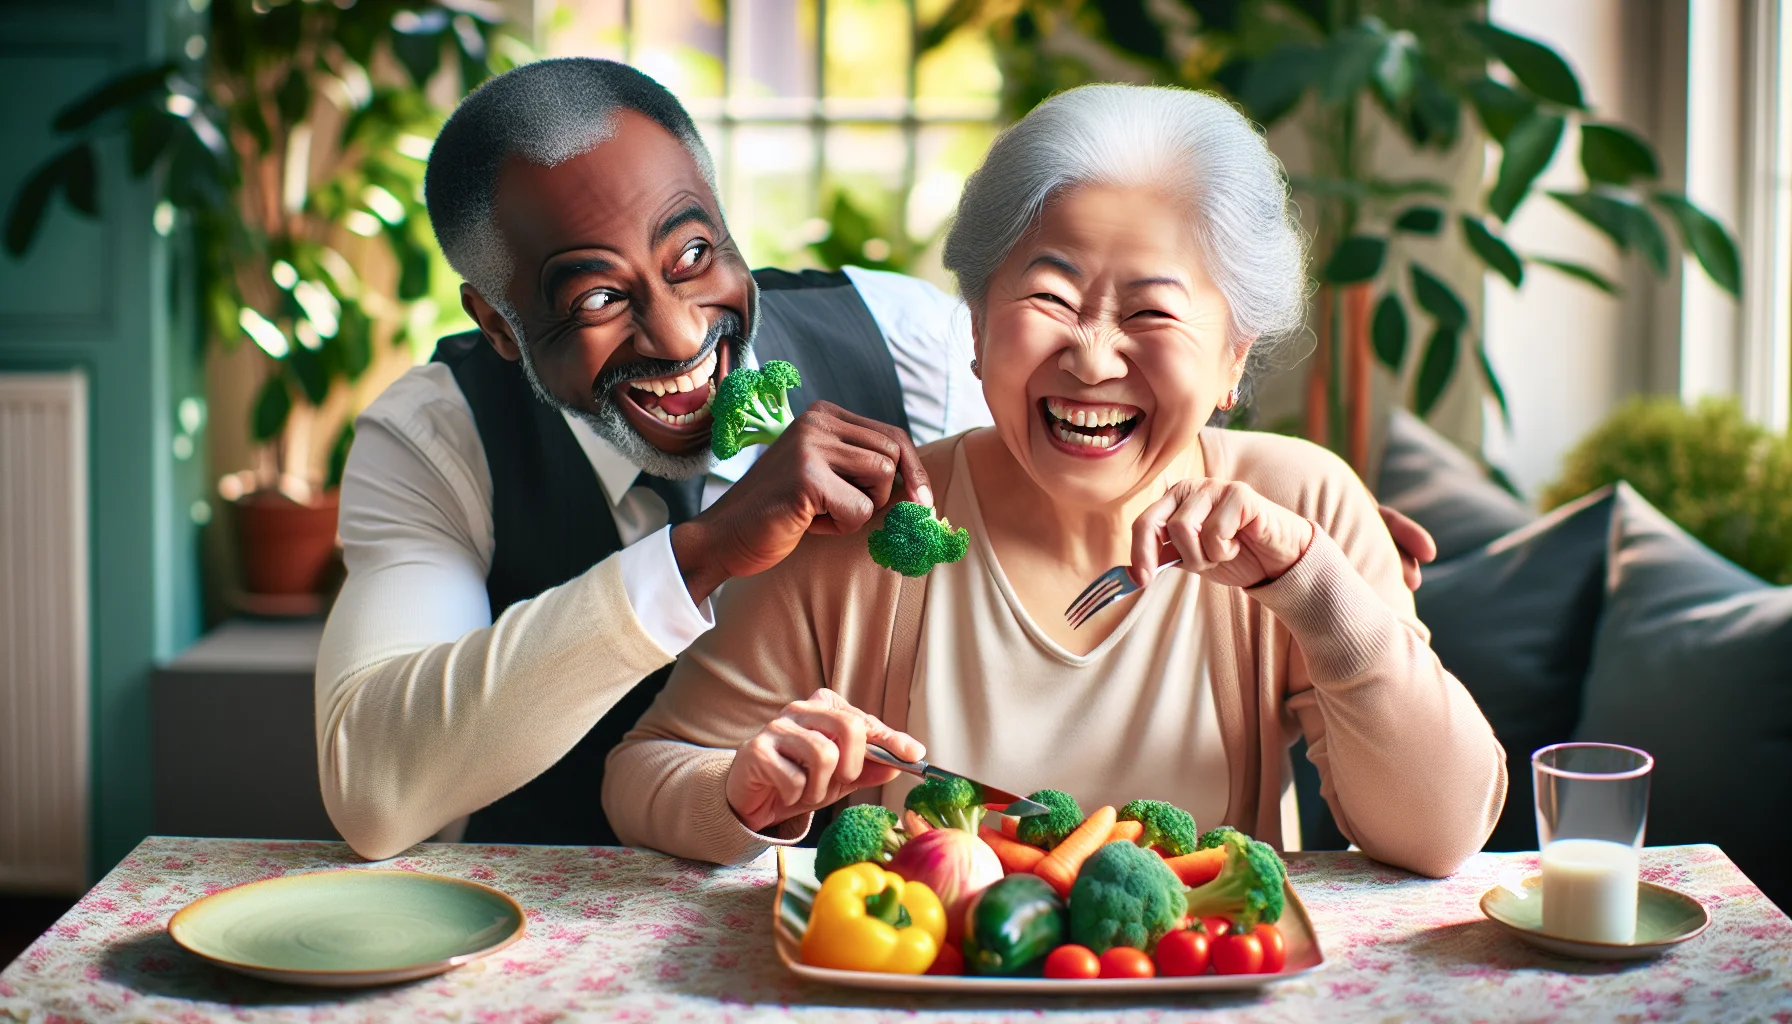 Depict a humorous scene involving two elderly individuals. One is a Black male and the other is a South Asian female, both enjoying their relapsing polychondritis-friendly diet. The Black gentleman is mischievously sneaking a broccoli floret onto the South Asian woman's plate full of colorful, healthy vegetables while she laughs heartily. They are sitting in a beautifully decorated dining room with plants and soft daylight streaming through the windows. The atmosphere is cheerful and full of life flaunting the benefits of a healthy diet in managing ailments in a light-hearted way.